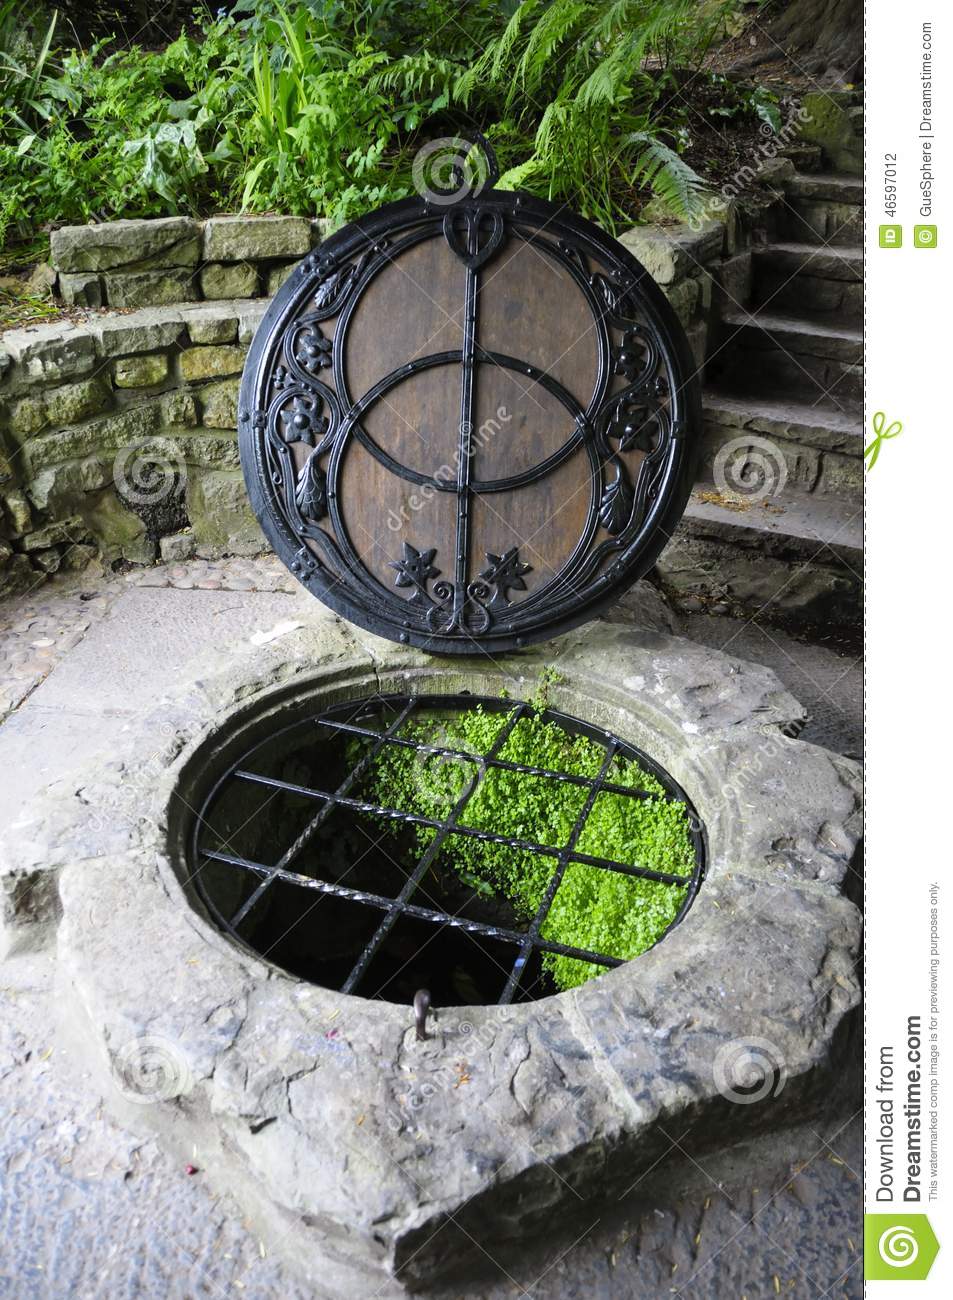 chalice well in the center of avalon at glastonbury tor.